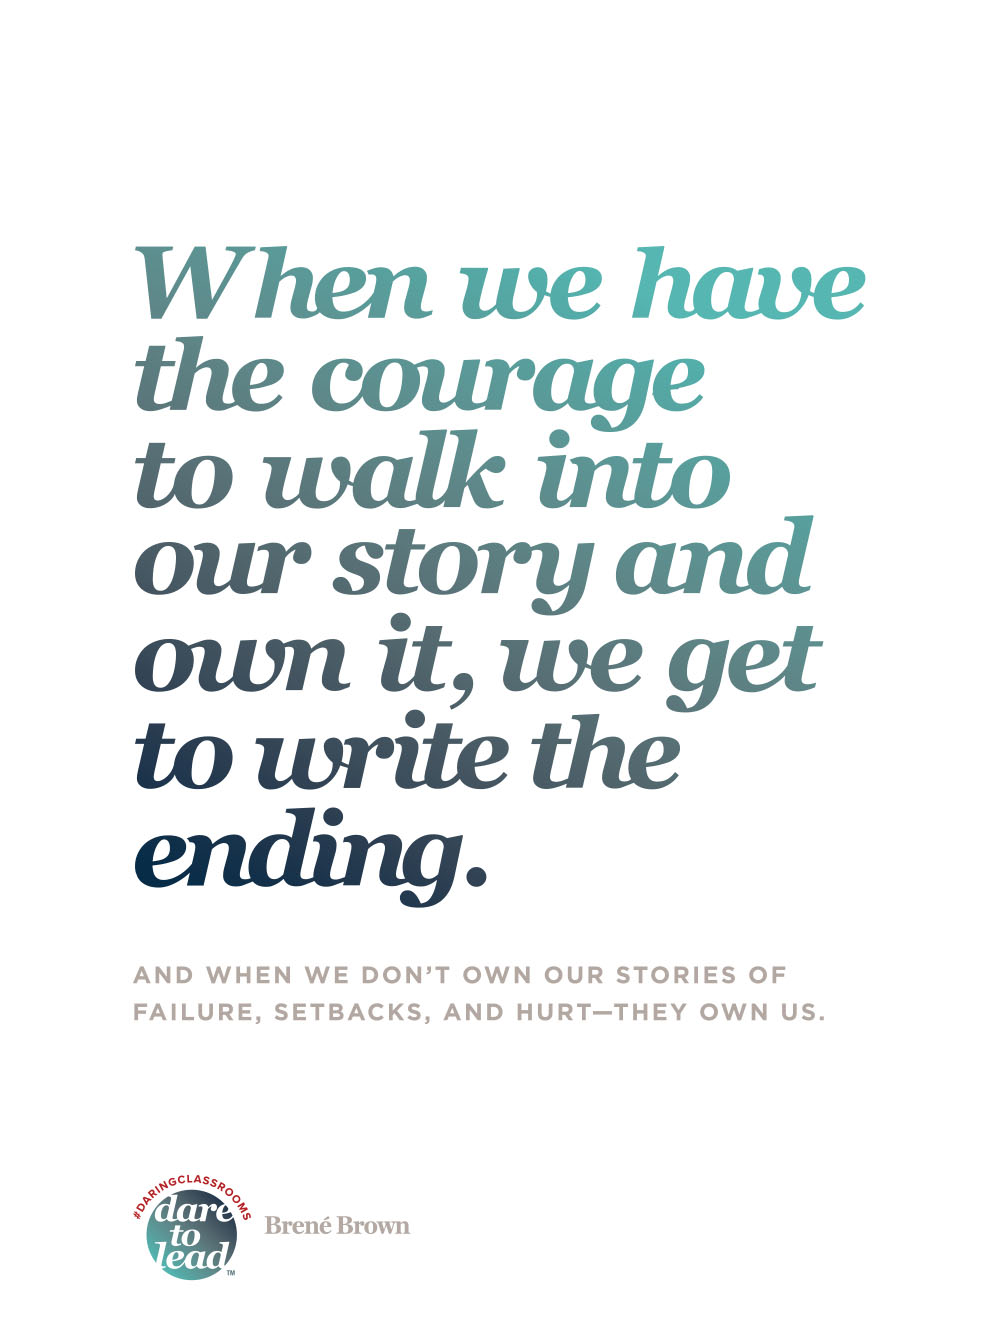 When we have the courage to walk into our story and own it, we get to write the ending.